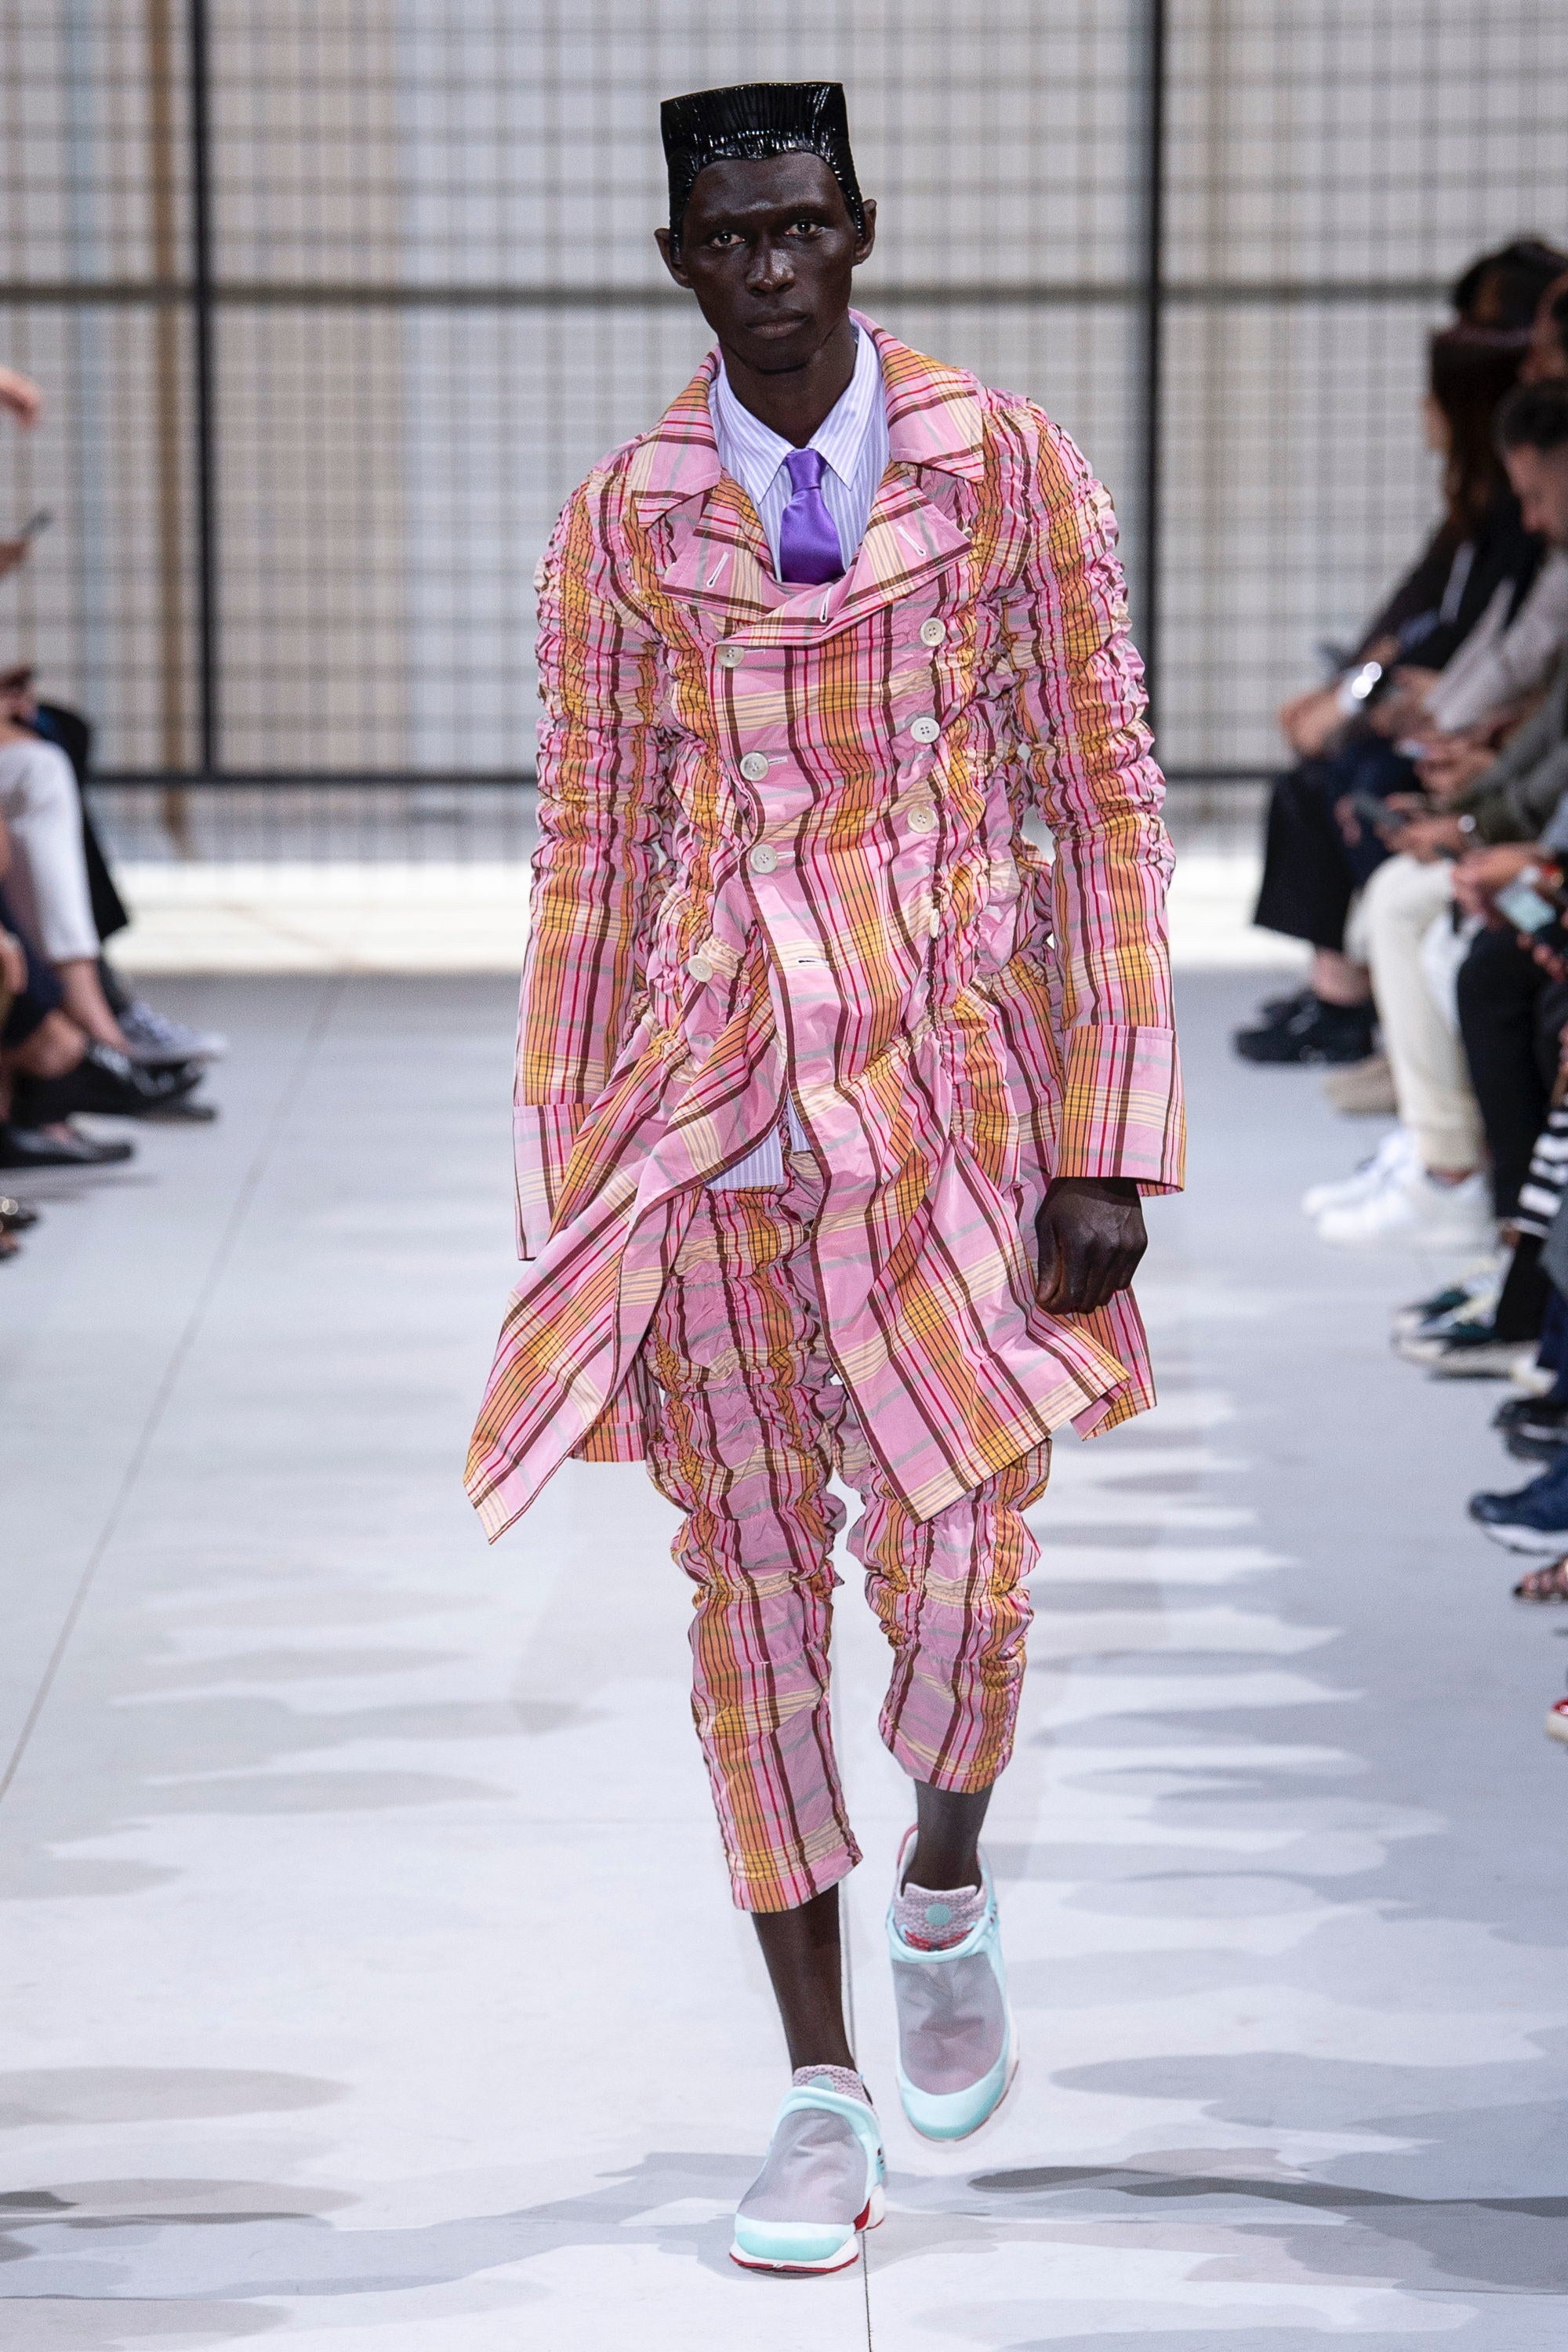 Men's Fashion Report: Go Bold For Spring With Colorful Streetwear!